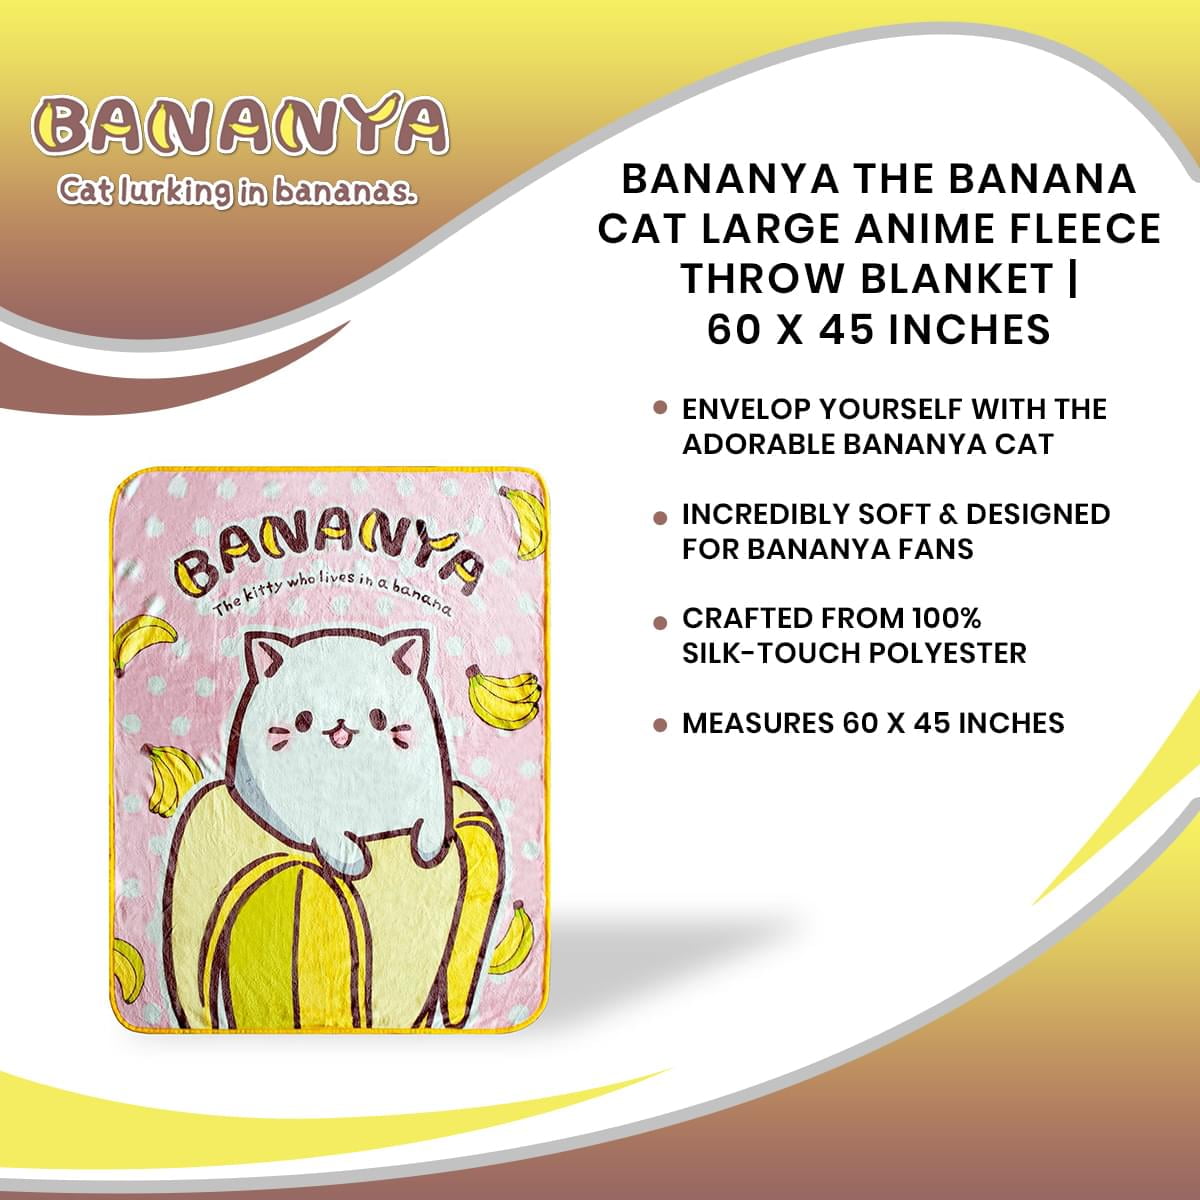 ok sothe bananyas hop everywhere right assuming the banana isnt a part  of their body and theyre just cats in bananas their legs are probably  hella shredded ive taken it upon myself